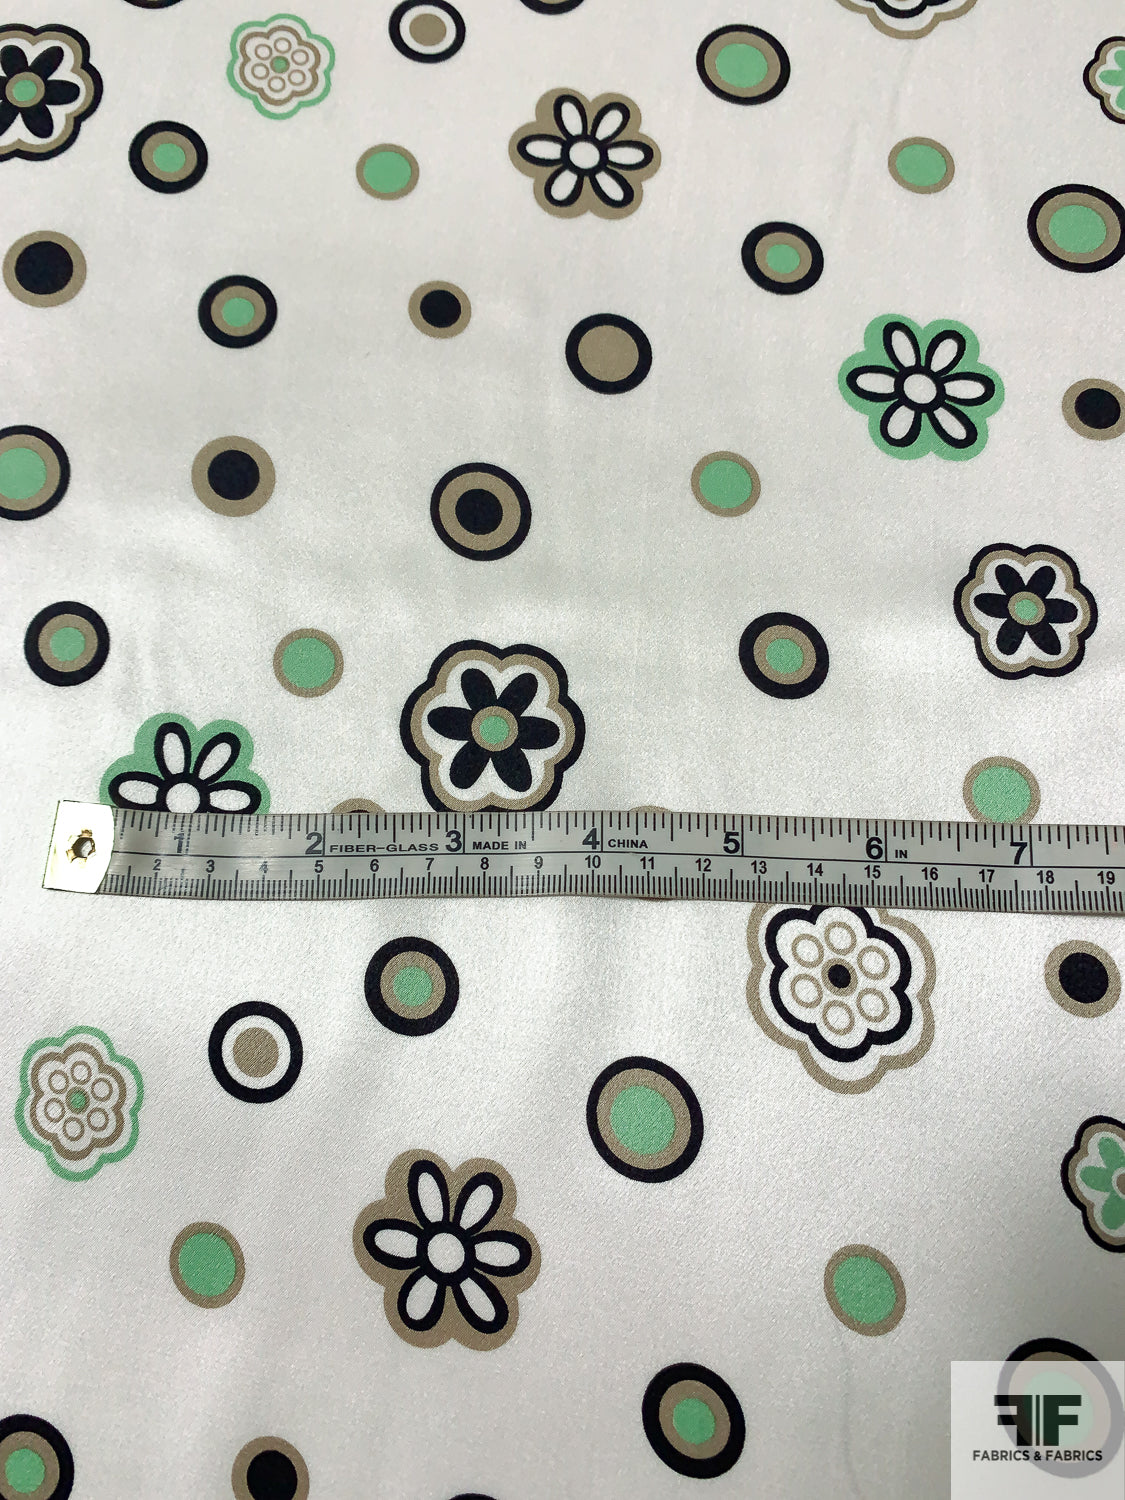 Youthful Floral and Cirlces Printed Silk Charmeuse - Seafoam / Taupe / Black / White